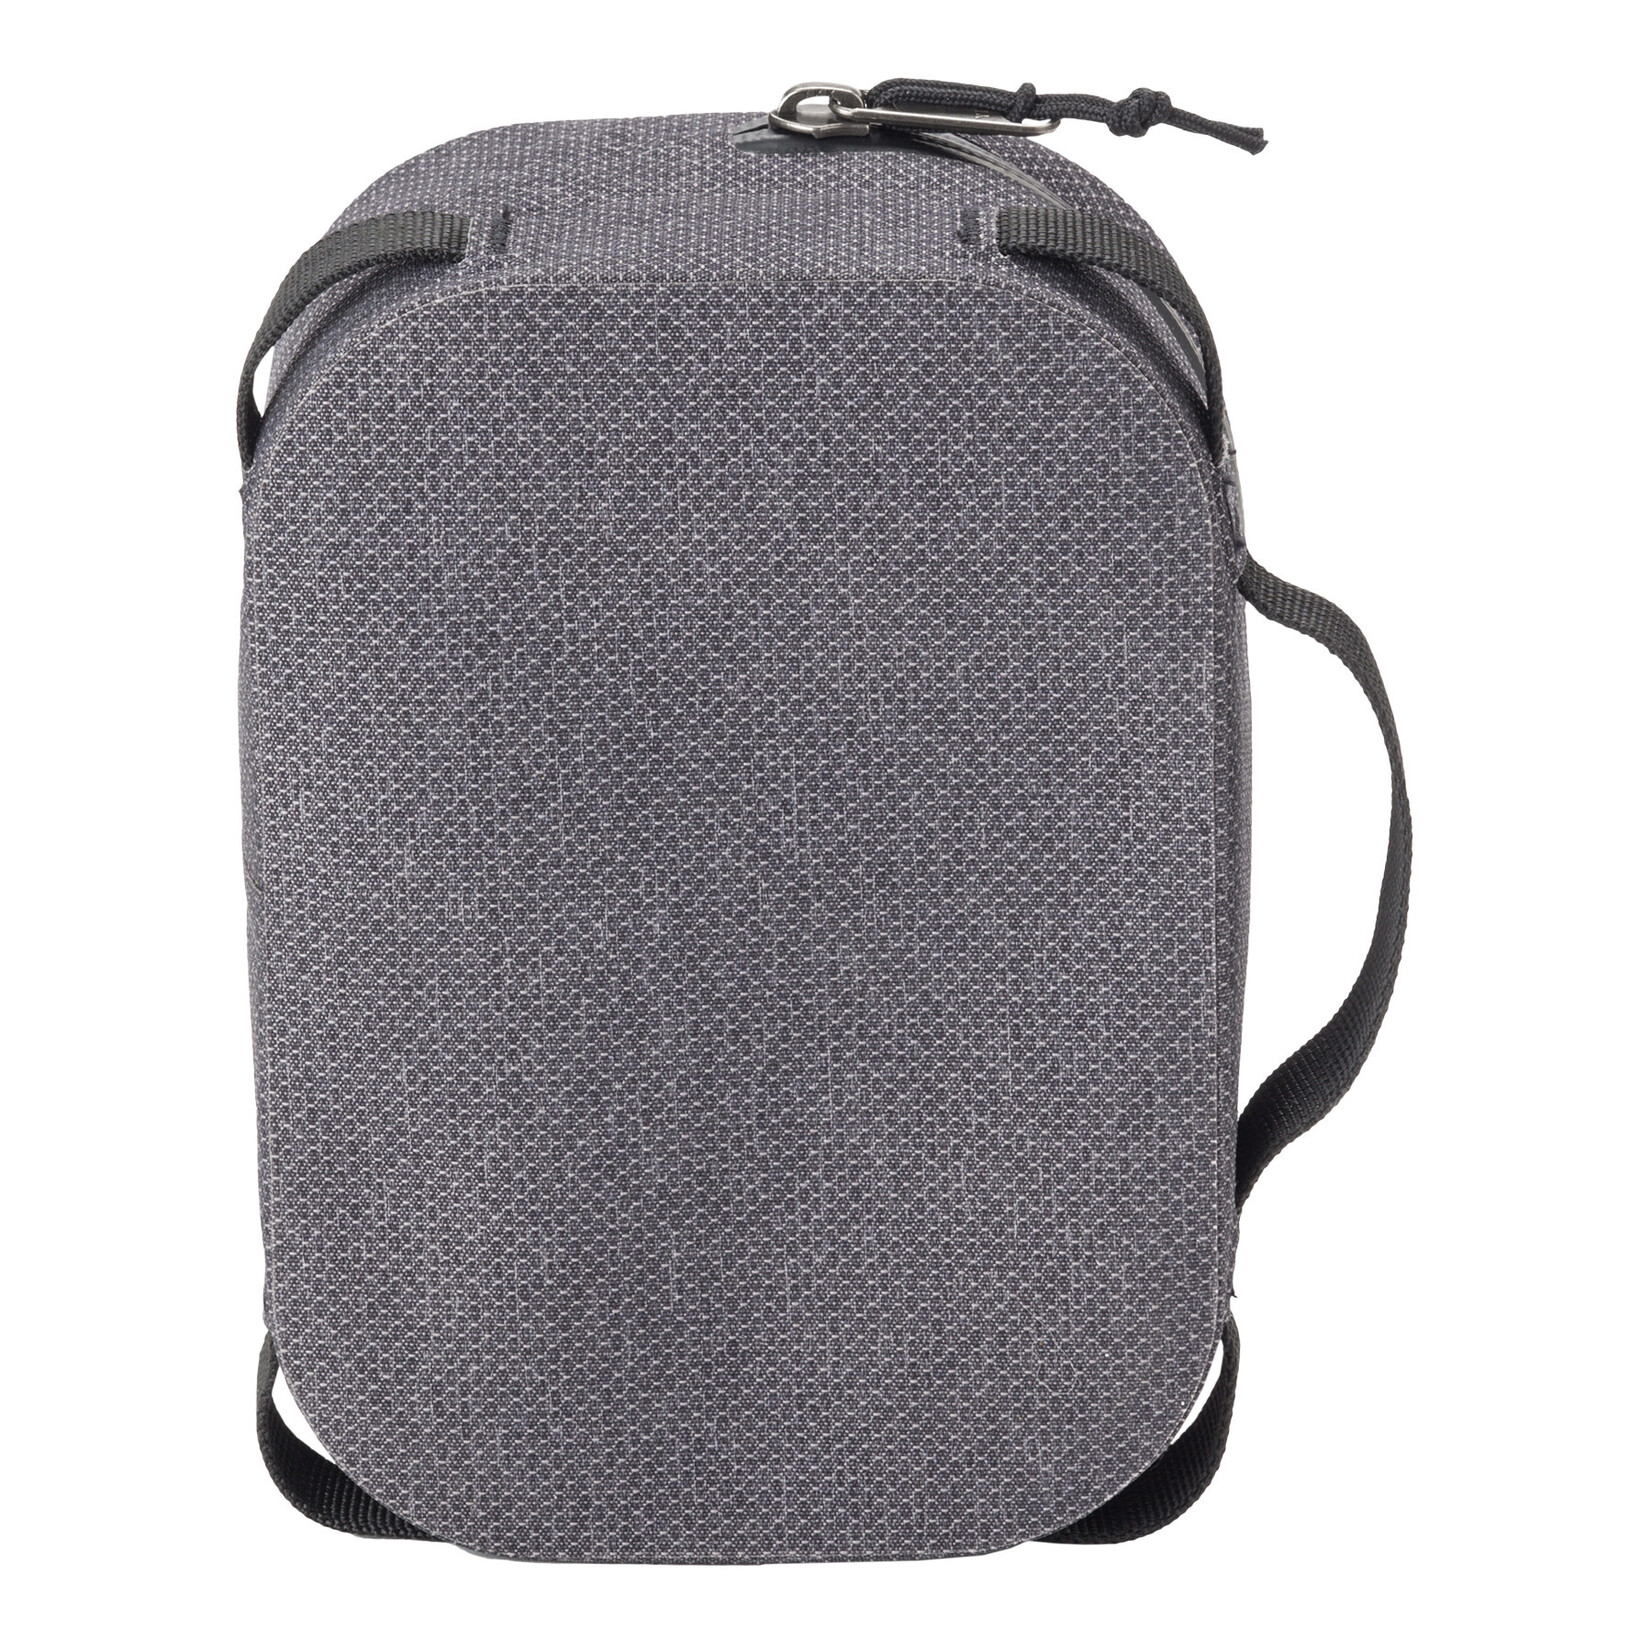 EAGLE CREEK PACK-IT DRY CUBE S